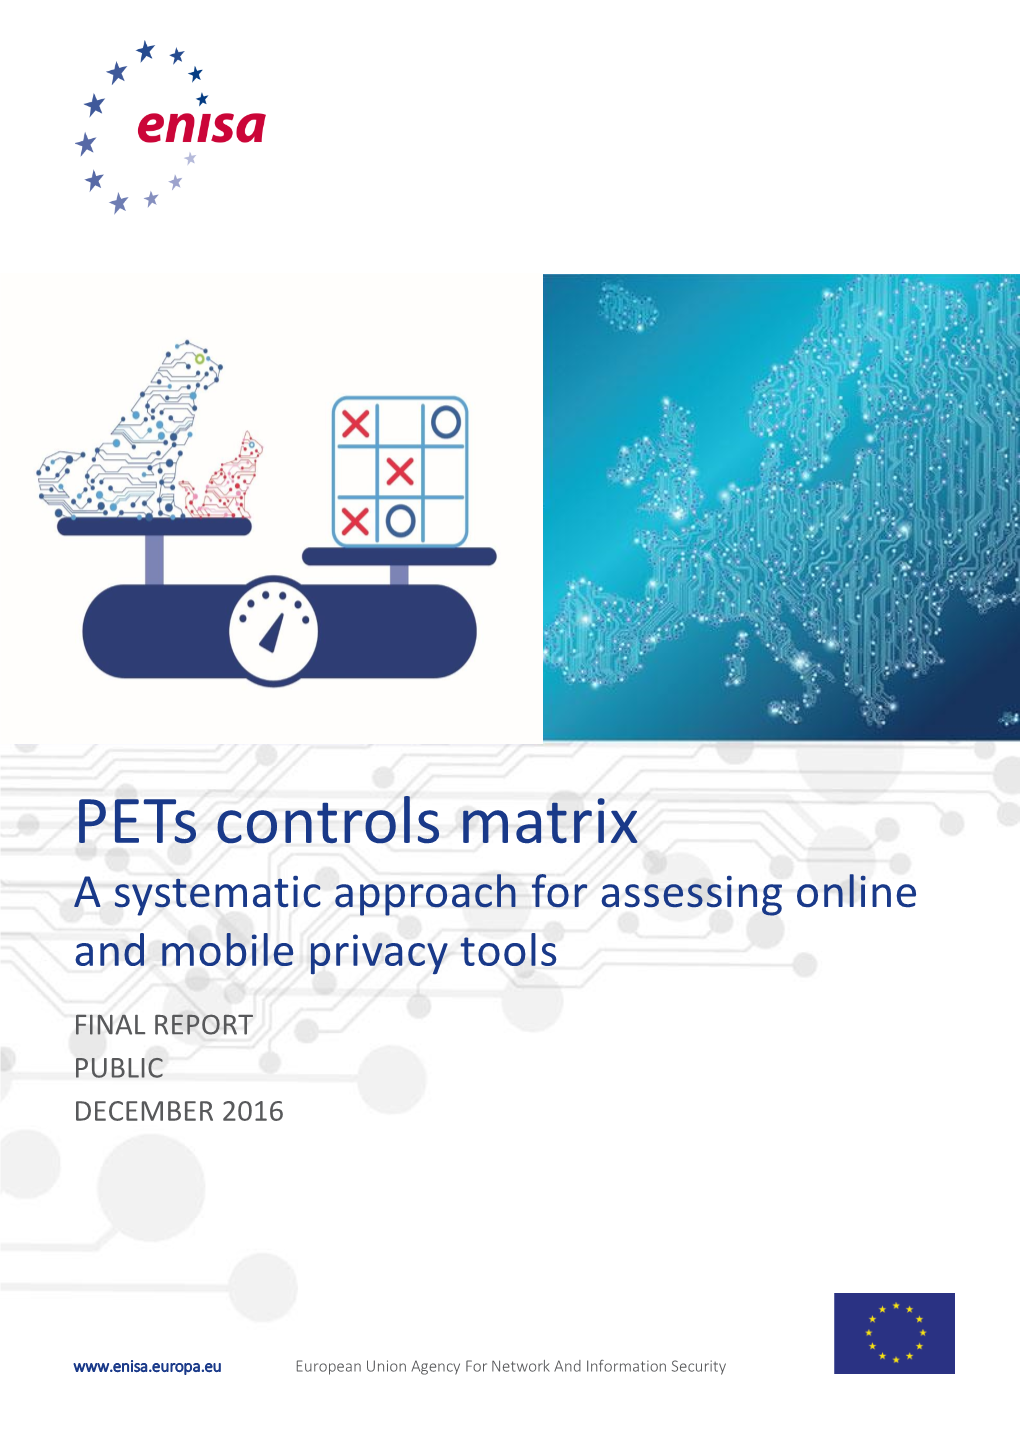 Pets Controls Matrix: a Systematic Approach for Assessing Online and Mobile Privacy Tools Final Report | Public | DECEMBER 2016